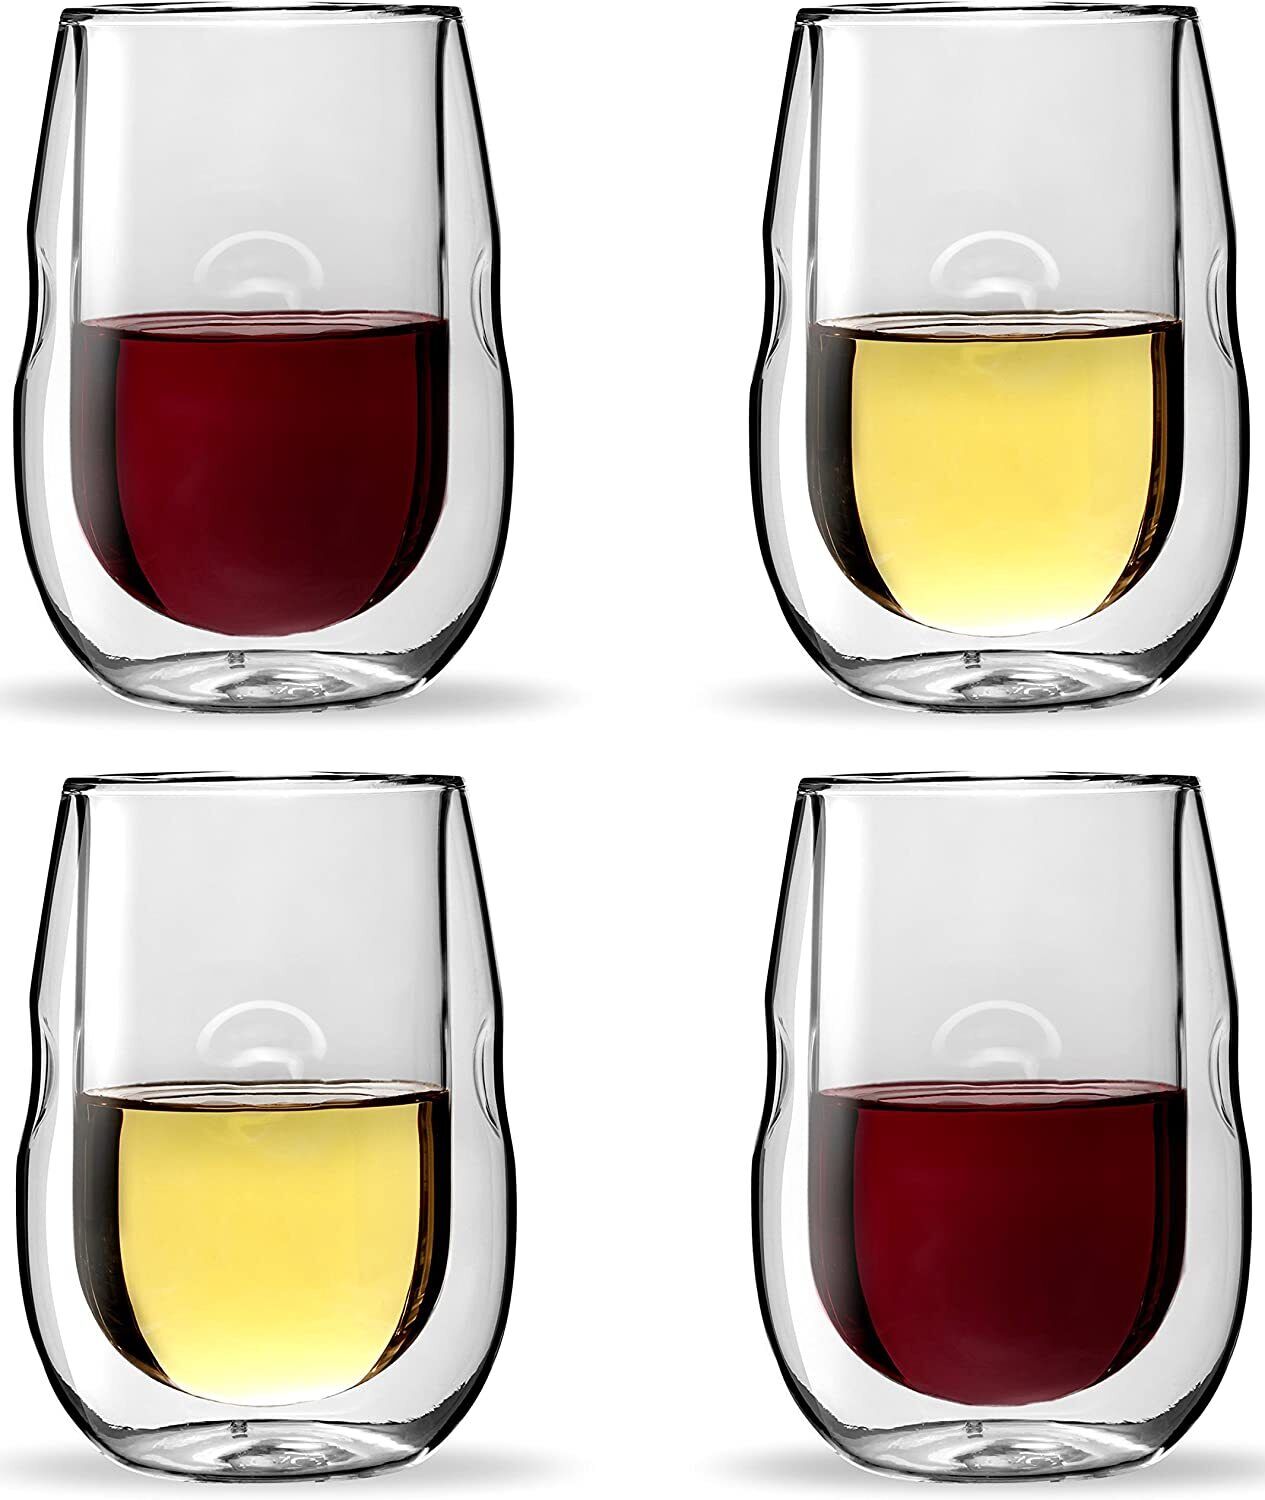 Moderna Artisan Series Double Wall Insulated Wine Glasses, Set of 4 Wine Glasses